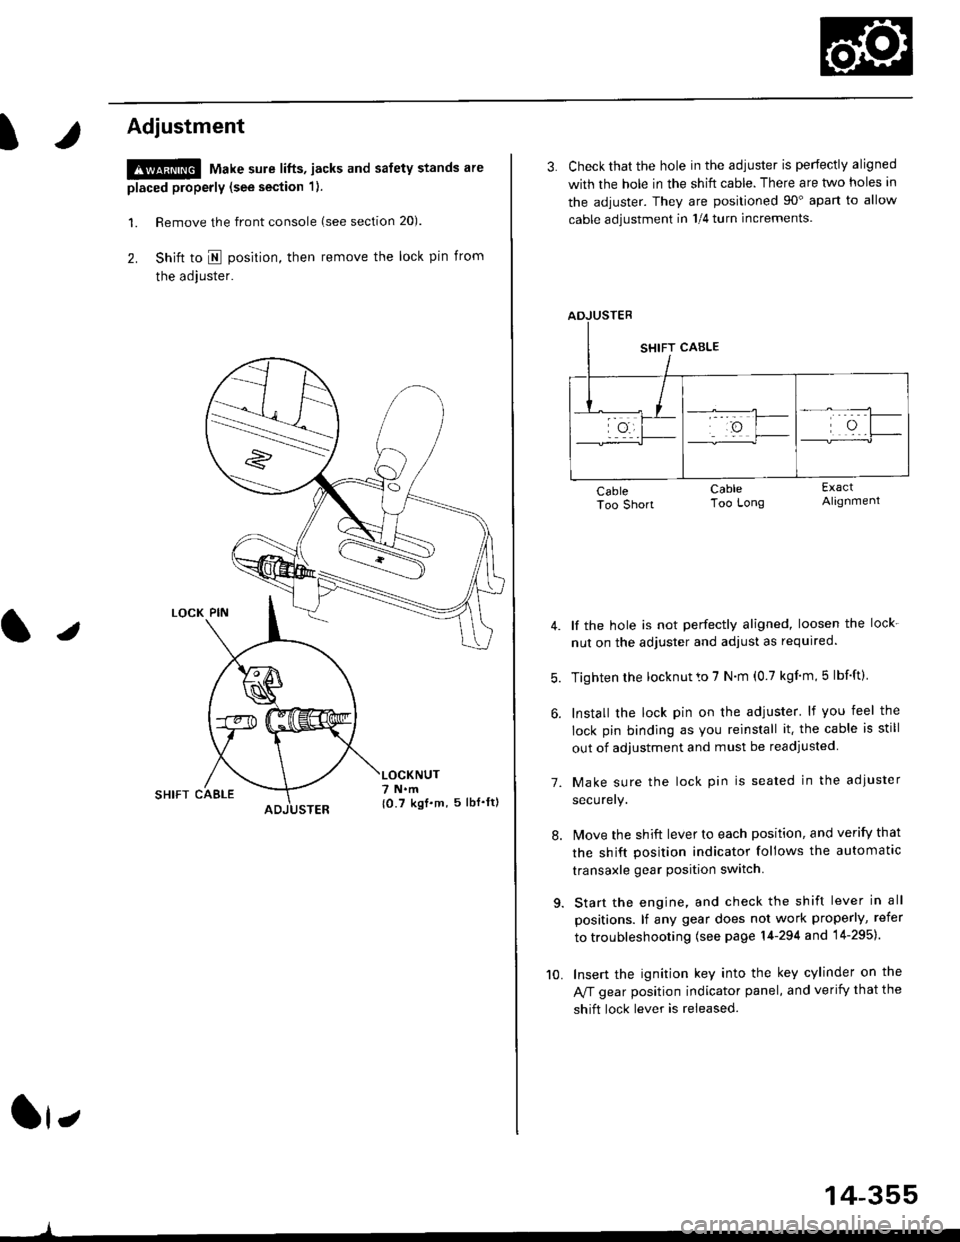 HONDA CIVIC 1999 6.G Workshop Manual t
Adjustment
!@ Make sure lifts, jacks and safety stands are
placed properly (see section 1).
l. Remove the front console (see section 20).
2. Shift to I posirion, then remove the lock pin from
the ad